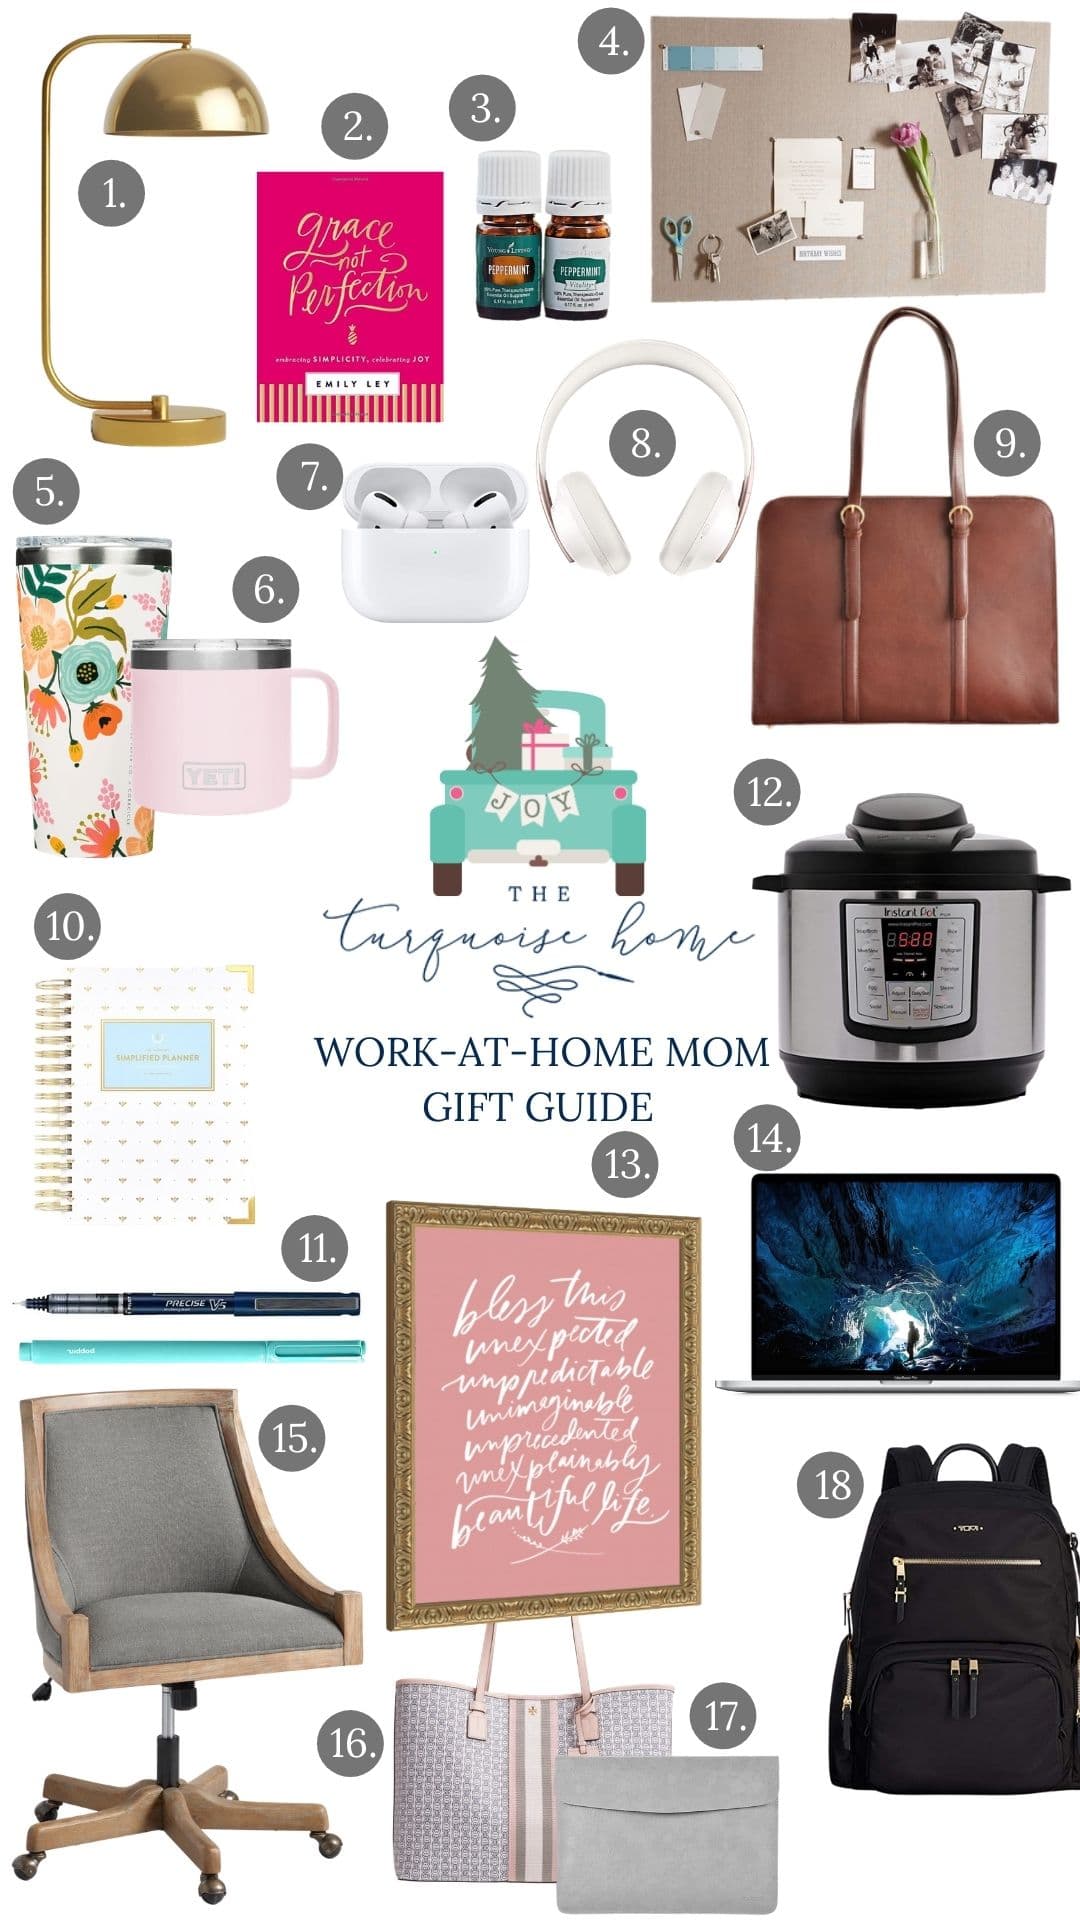 https://theturquoisehome.com/wp-content/uploads/2016/10/Work-at-Home-Mom-Gift-Guides-2.jpg